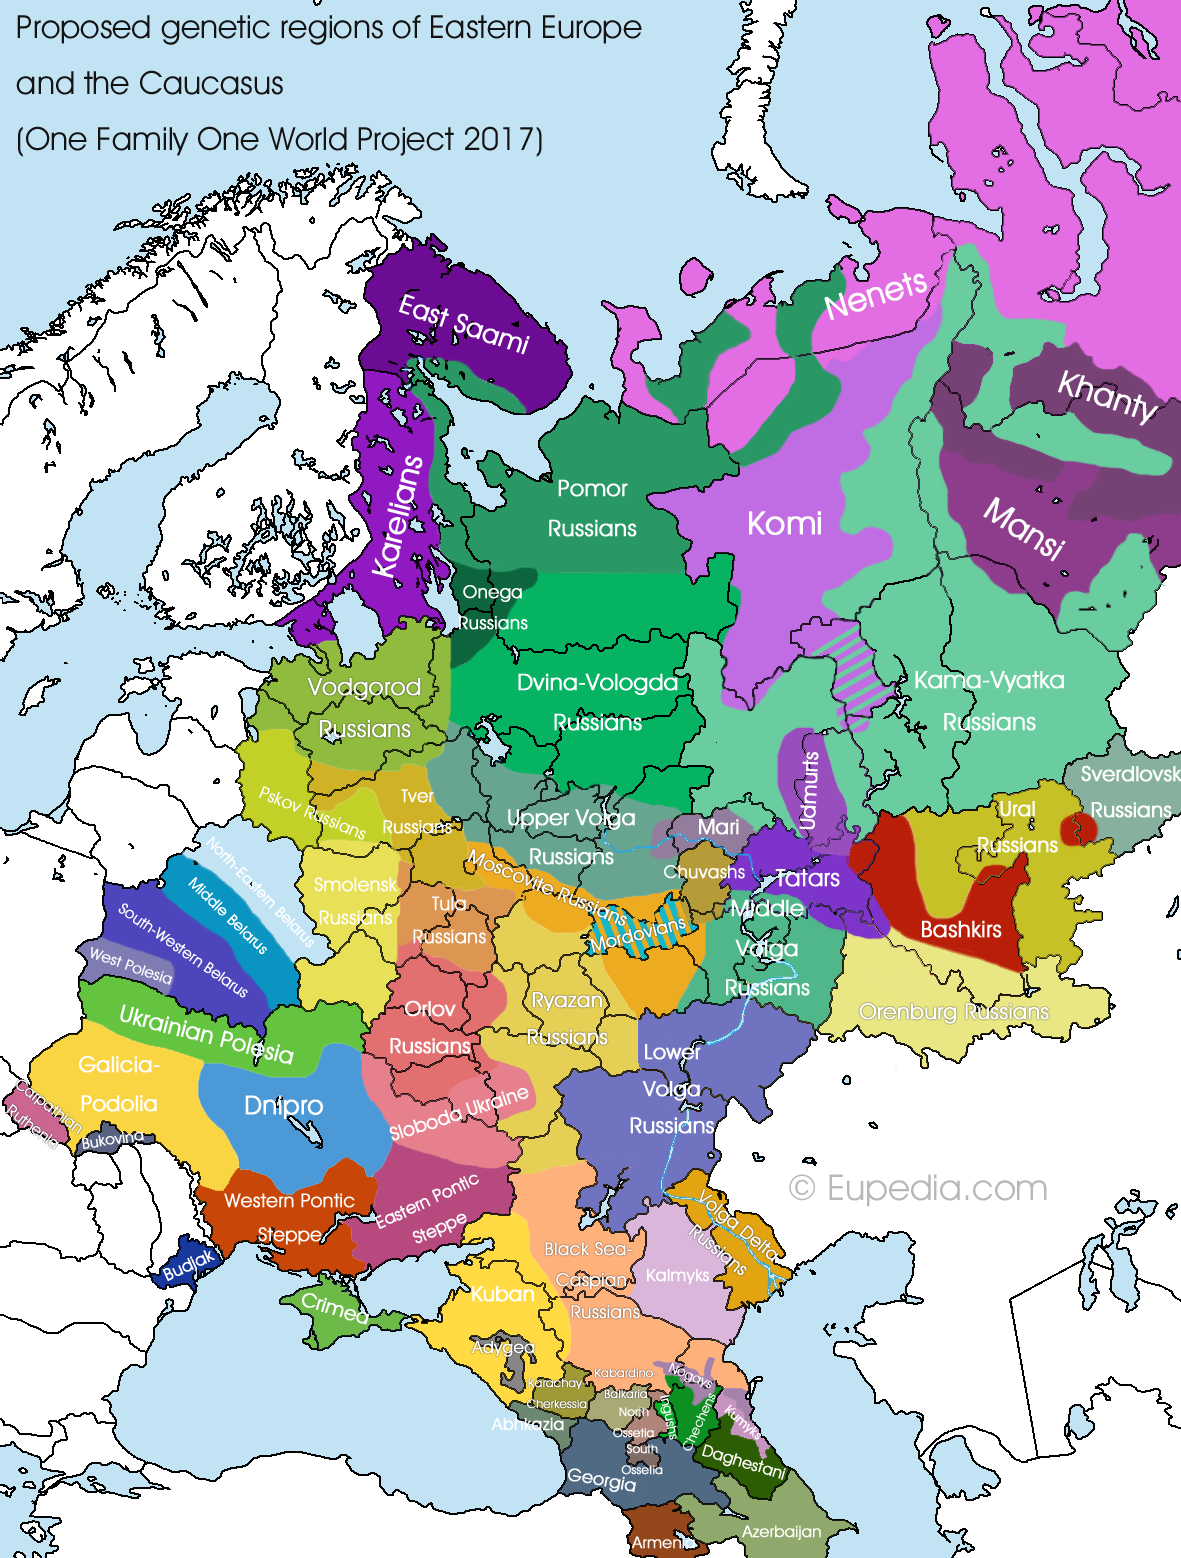 Proposed genetic divisions of Eastern Europe and the Caucasus - One Family One World DNA Project